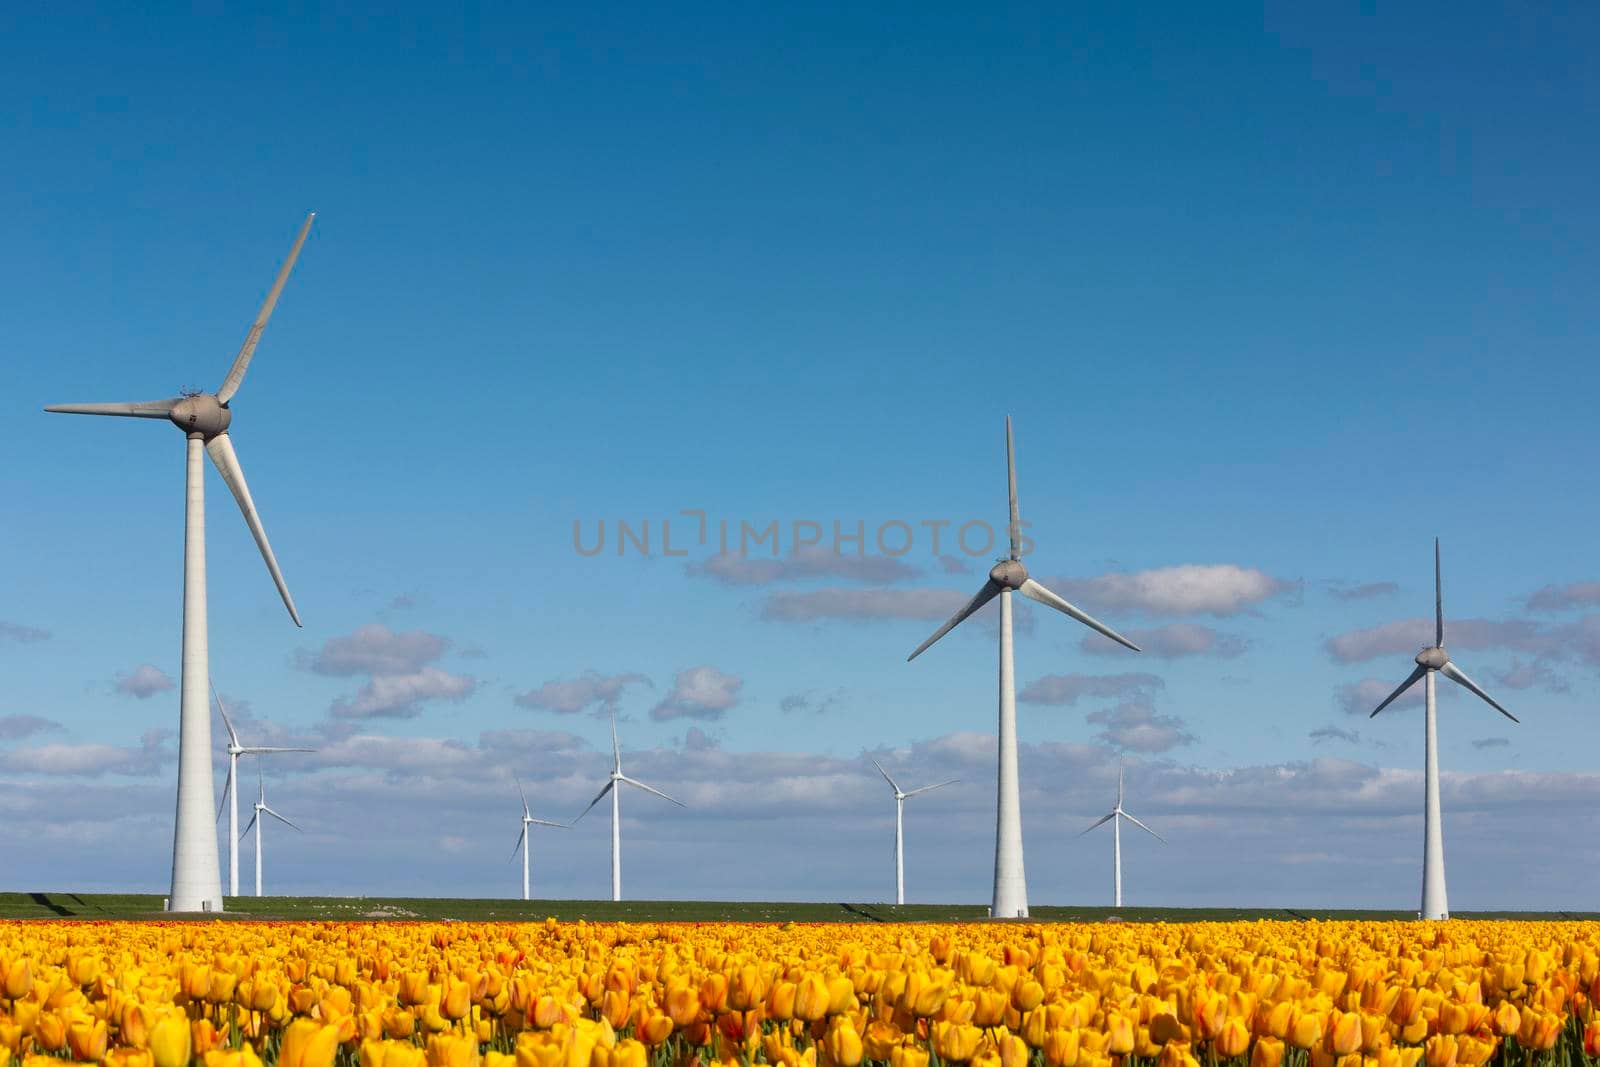 yellow tulips and wind turbines under blue sky in the netherlands by ahavelaar